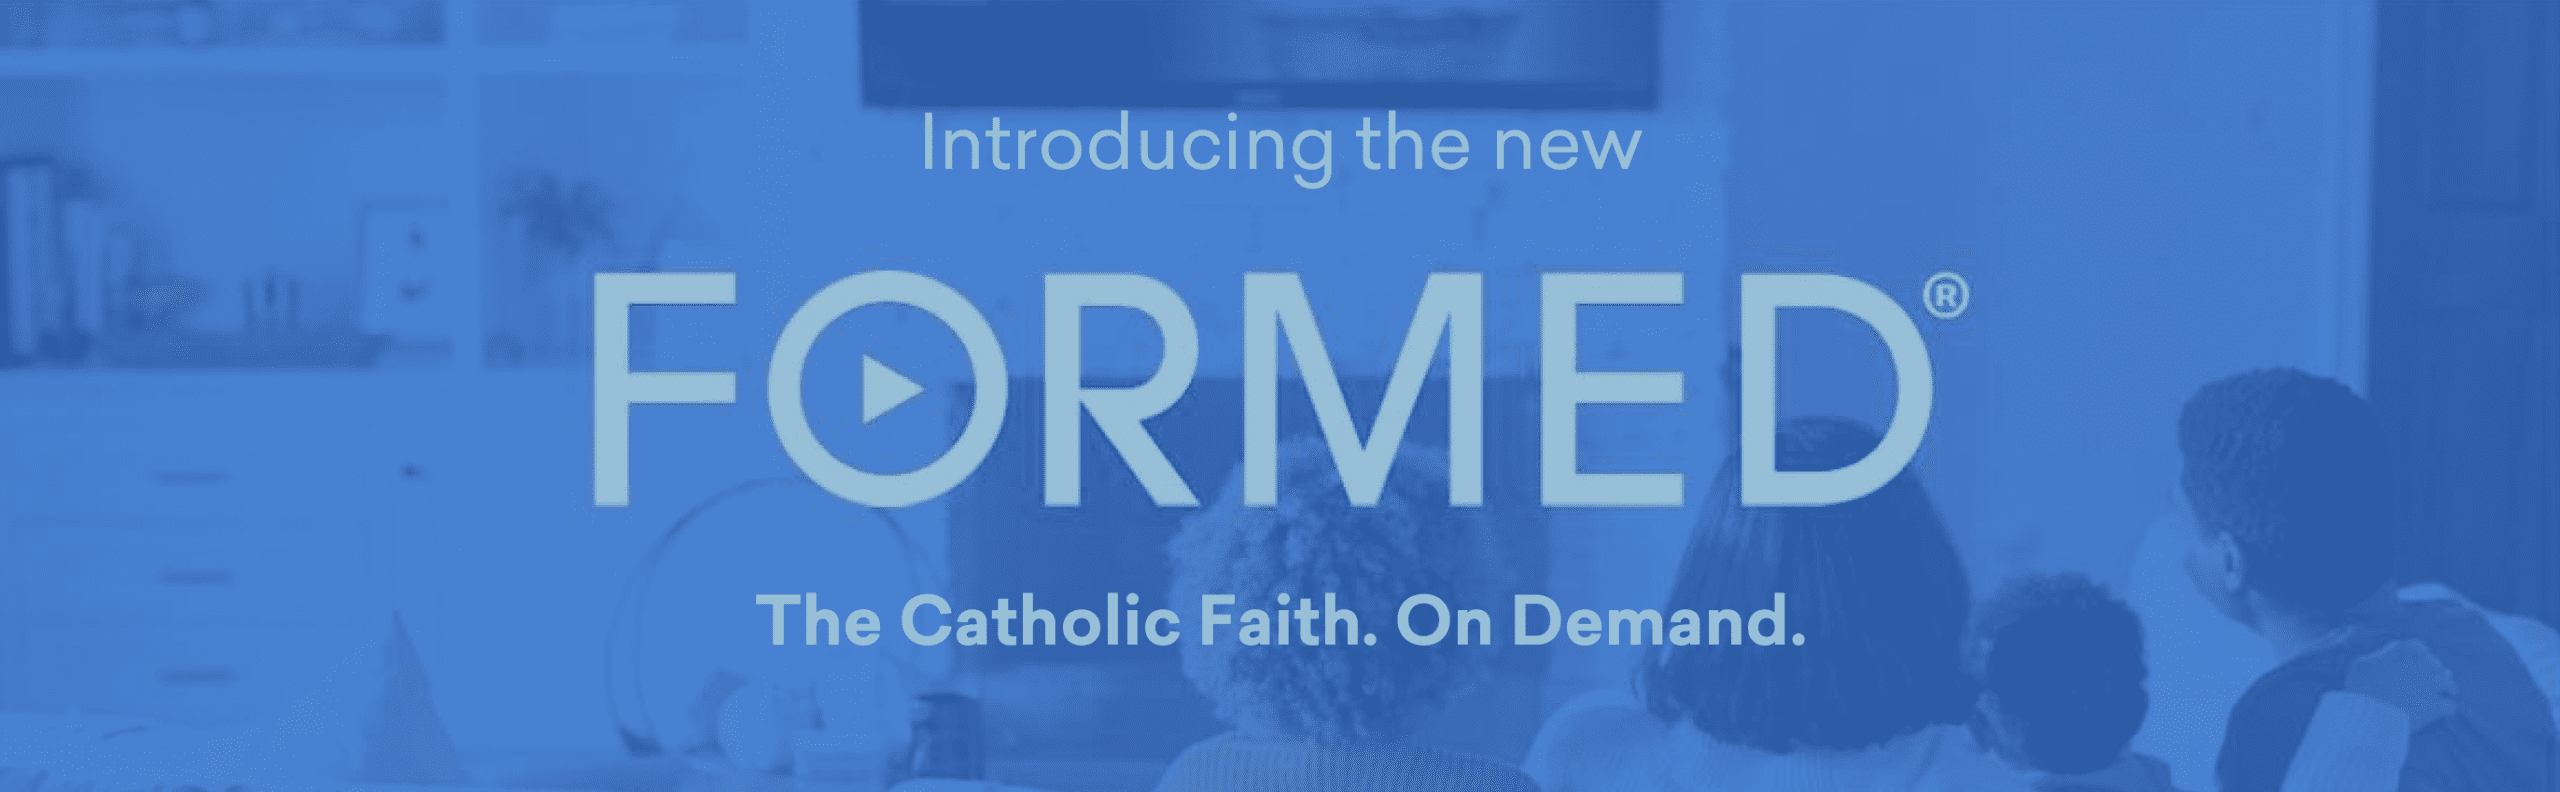 Introducing the new FORMED!